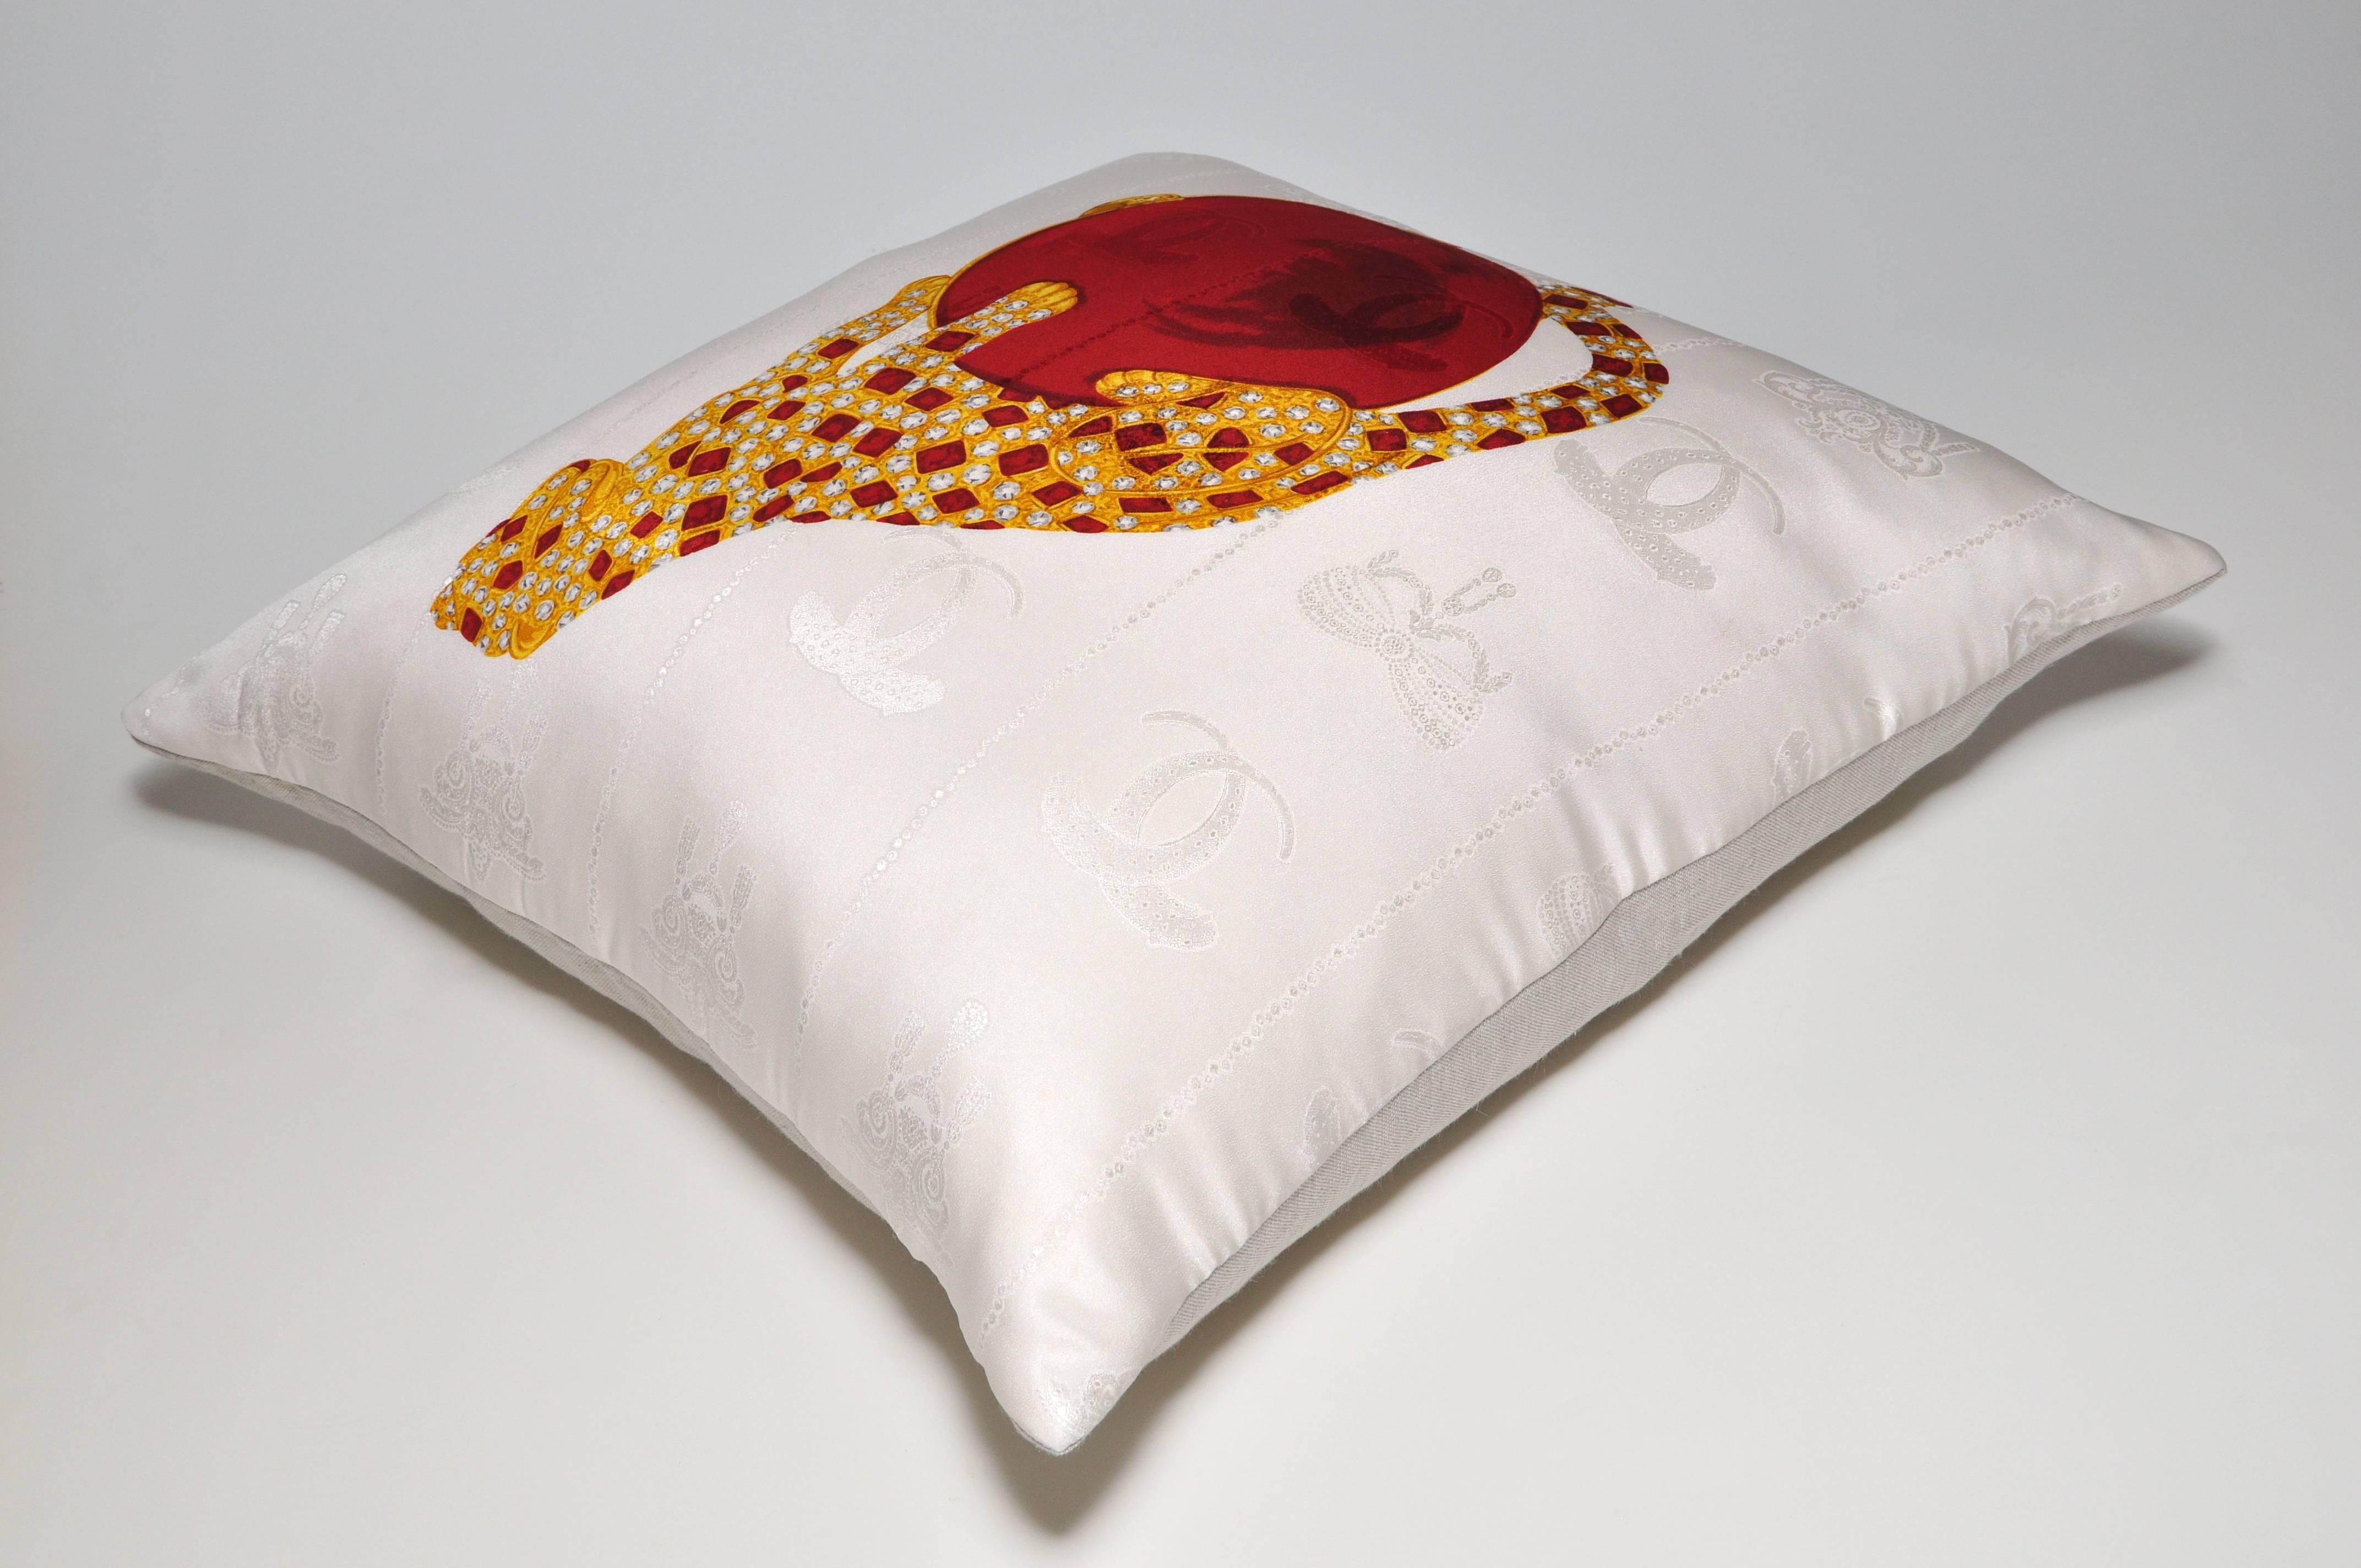 Large custom-made one-of-a-kind luxury cushion (pillow) created from an exquisite vintage pure silk Cartier fashion scarf in a striking bold design. It features their signature iconic Panther perched on top of a precious spherical ruby stone in a